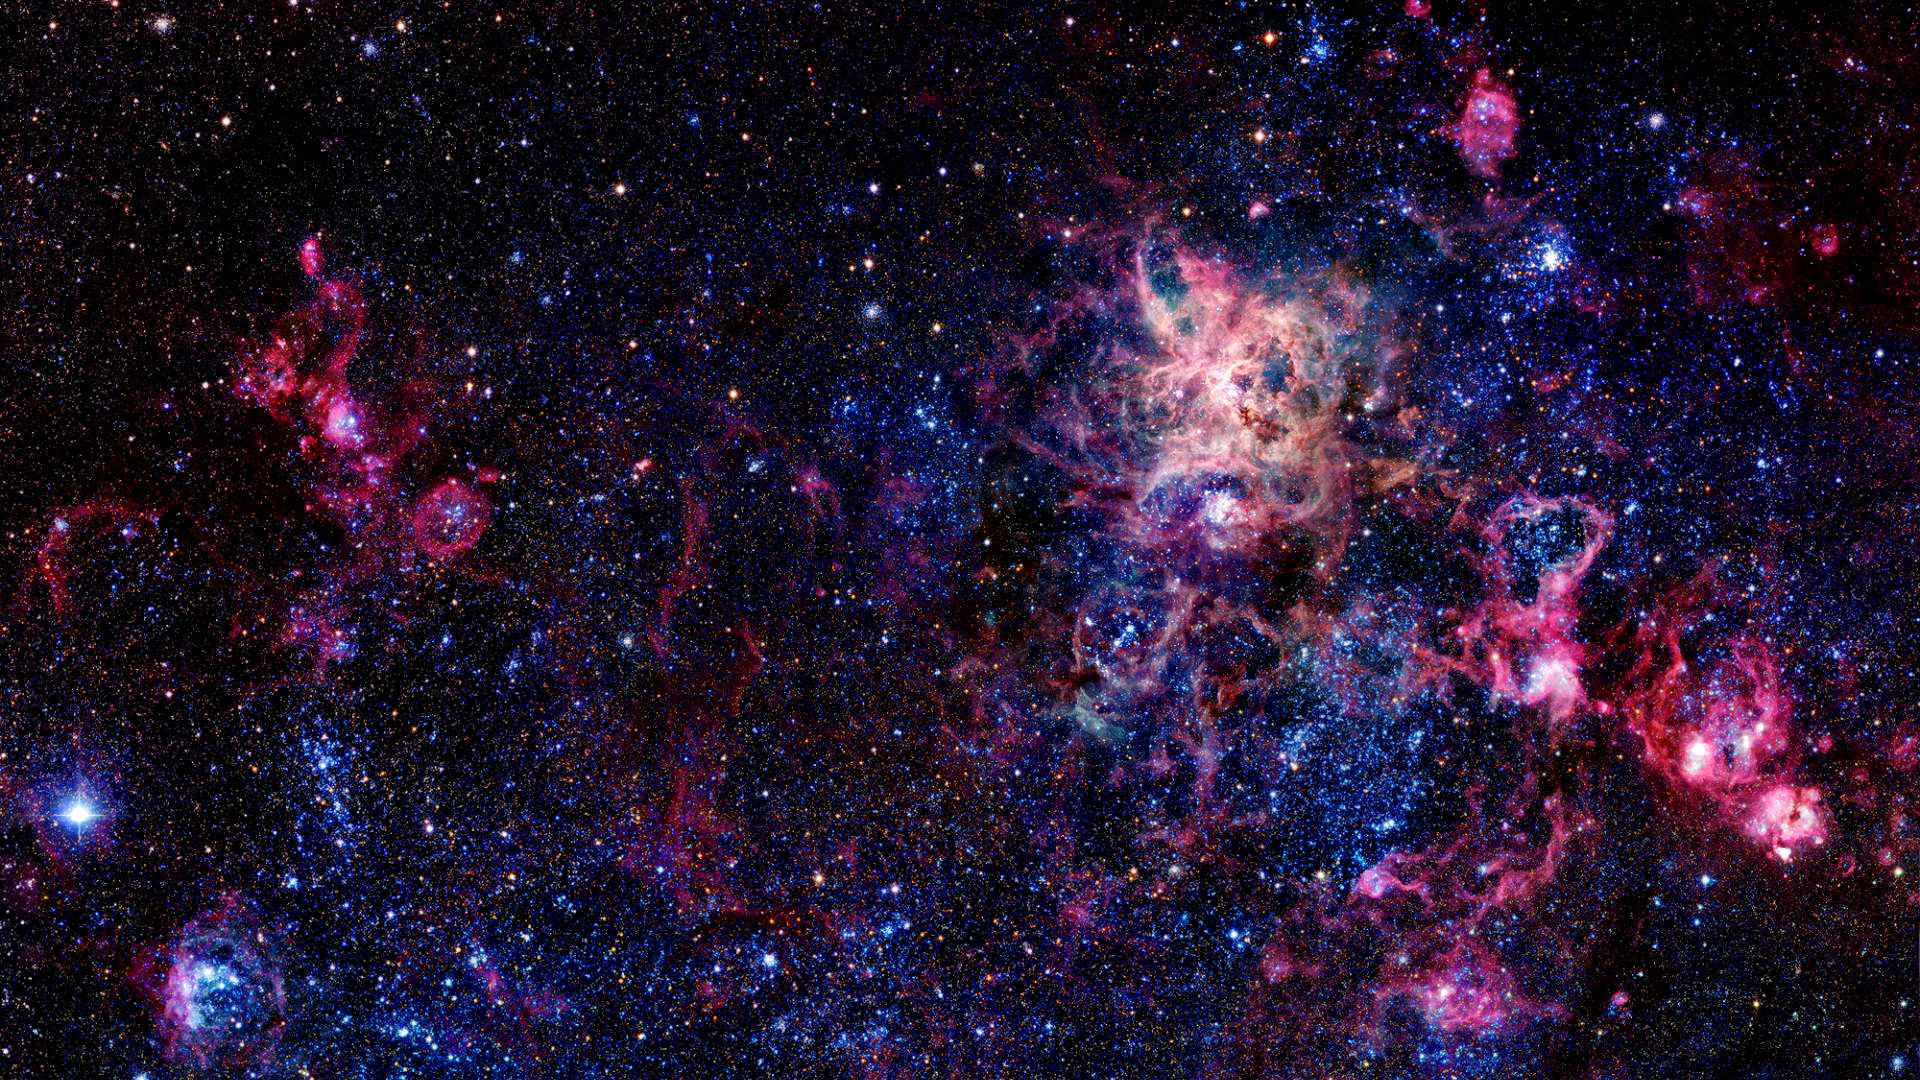 1920x1080 Galaxy in space - Wicked Wallpaper - FREE HD wallpapers | HD Space  Wallpapers | Pinterest | Hd space